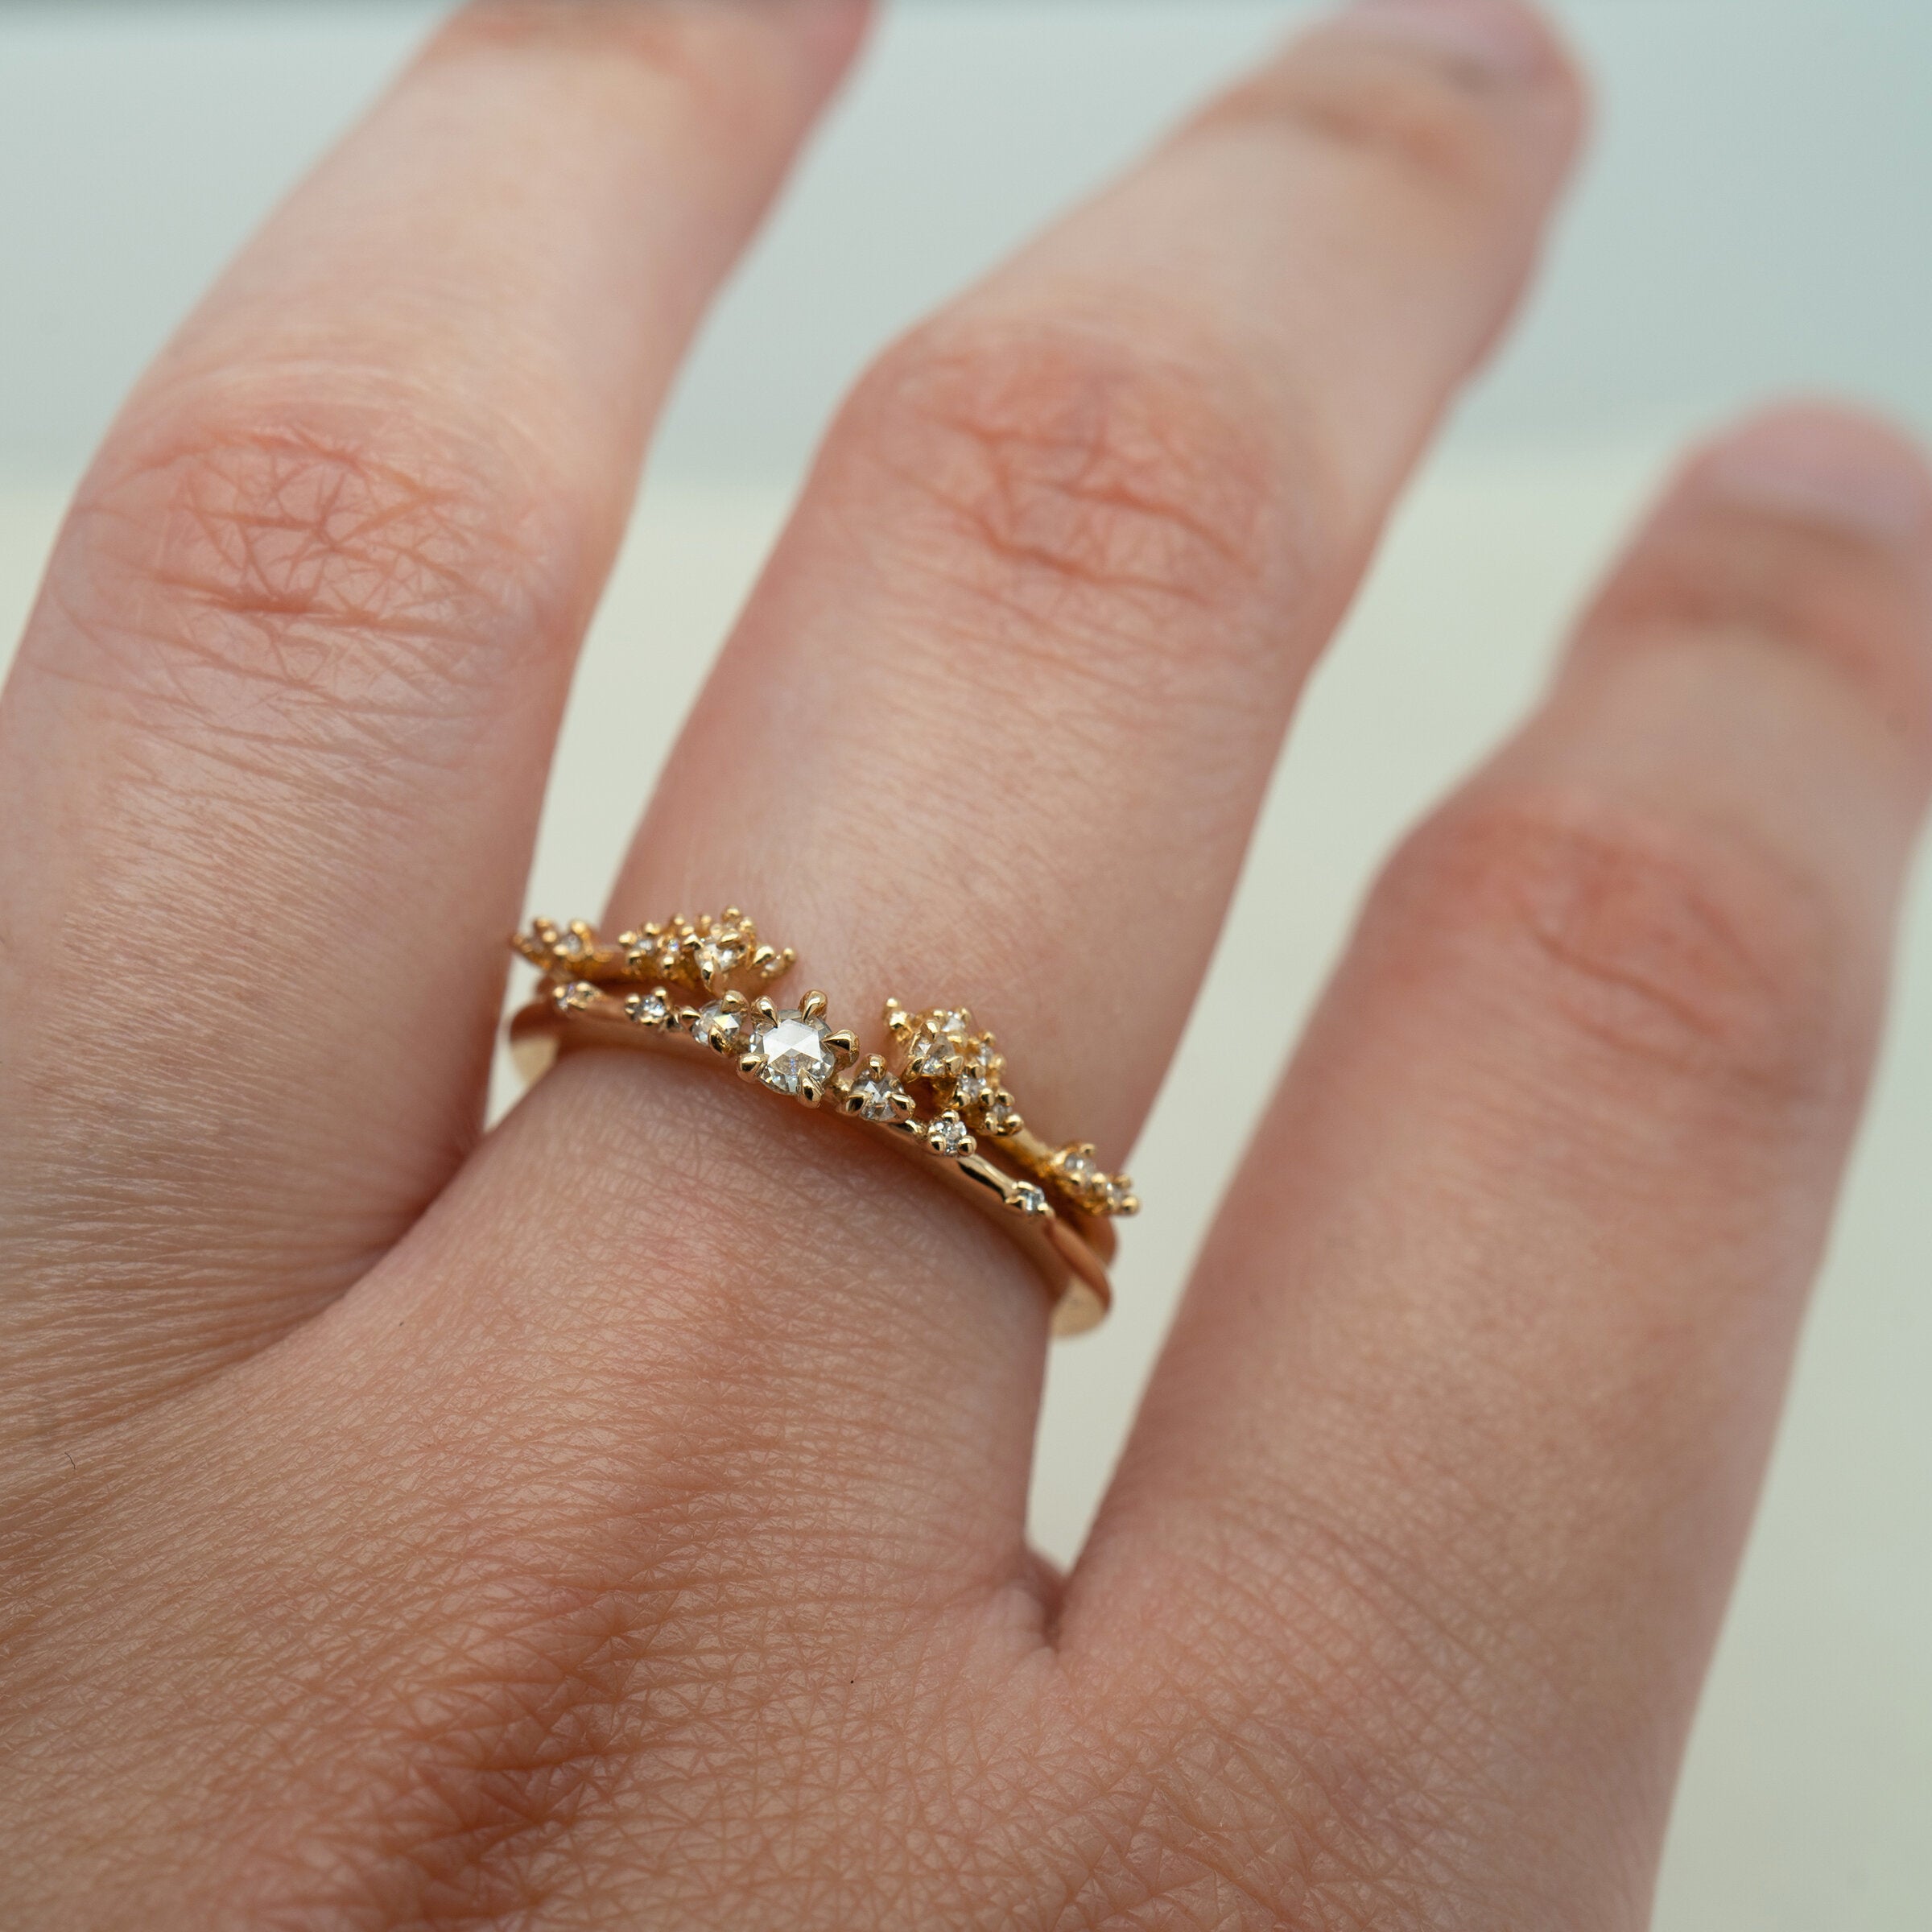 A stack of Laurie Fleming Jewellery rings worn on a hand. At the base of the finger is a "Water Lily Ring," a delicate solid gold stacking ring with round brilliant and rose cut diamonds scattered along the band. On top of that is a "Daphne Band", an open band that features clusters of both round brilliant and rose cut diamonds in varying sizes. The hand is in front of a pale grey background.